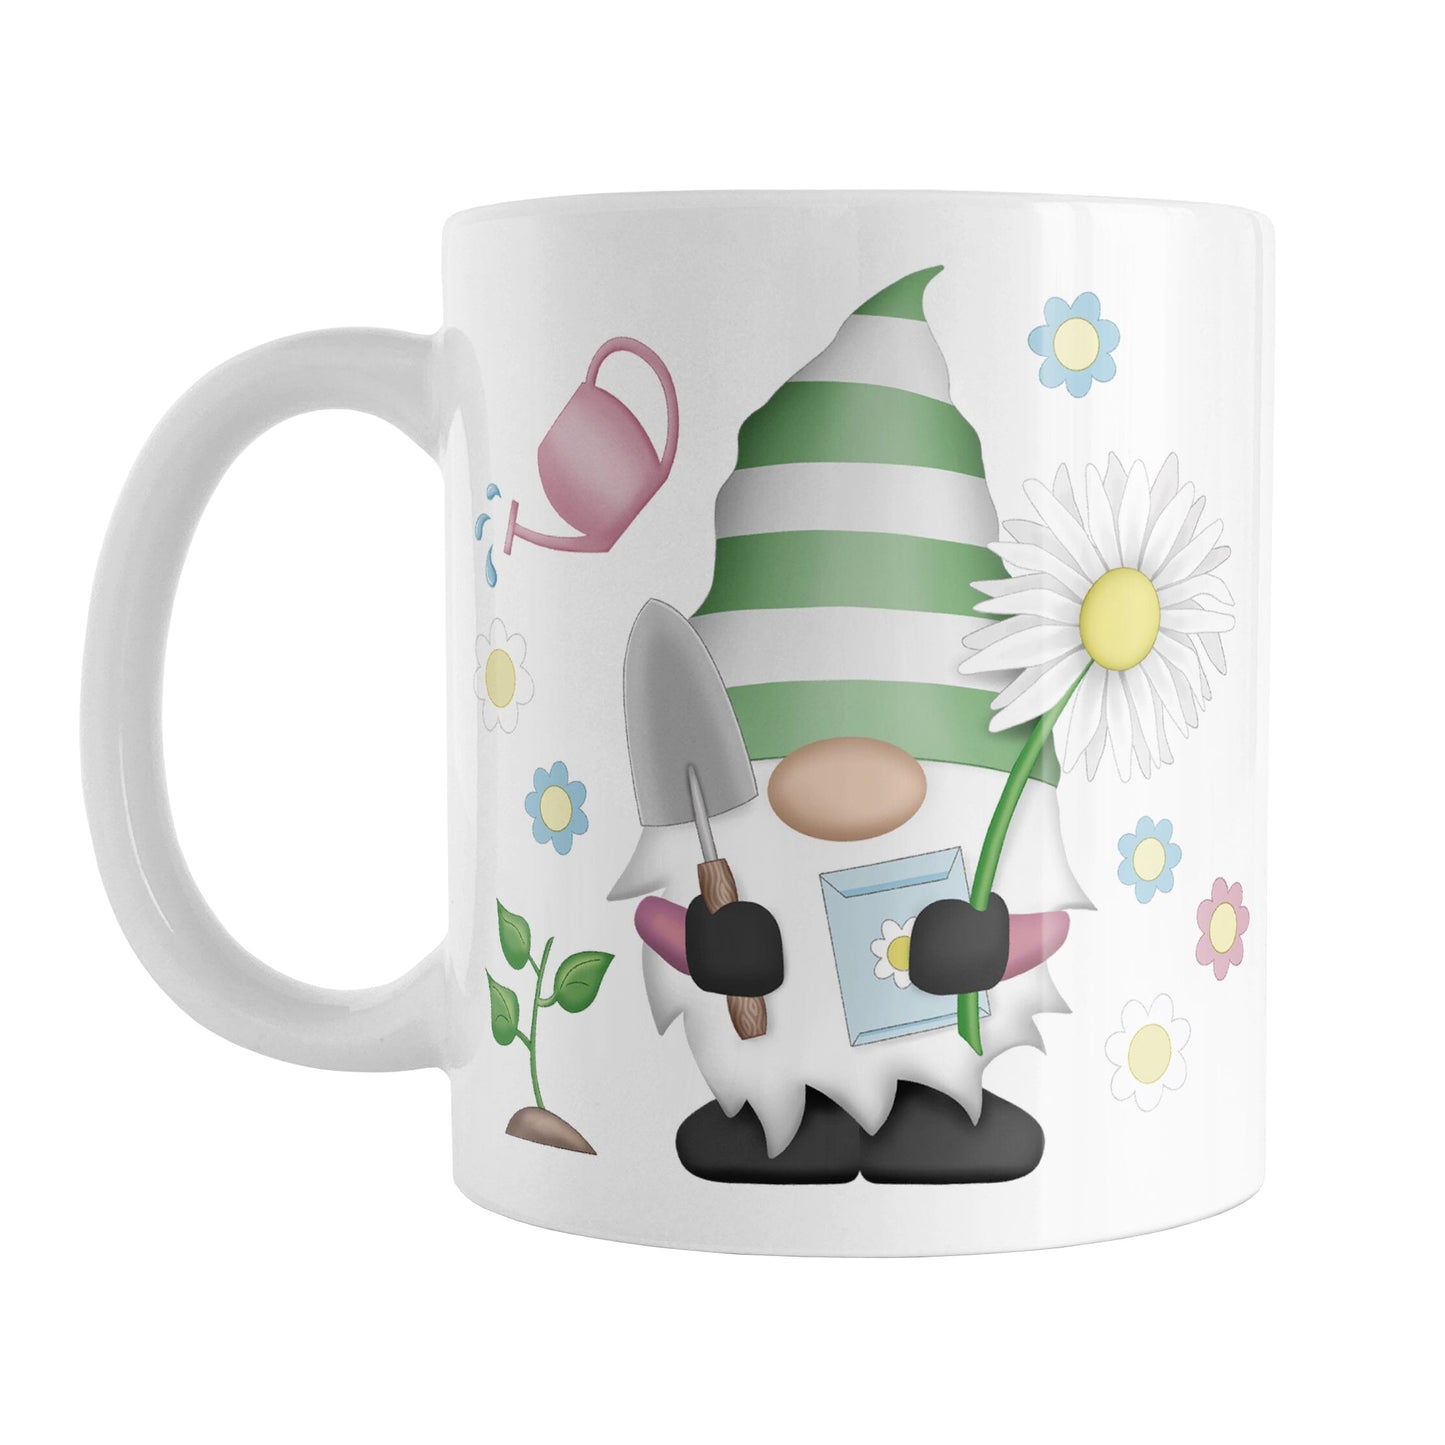 Spring Gardening Gnome Mug (11oz) at Amy's Coffee Mugs. A ceramic coffee mug designed with an adorable gnome in spring colors holding a gardening spade, seeds packet, and an oversized daisy, with a plant, watering can and flowers around him.